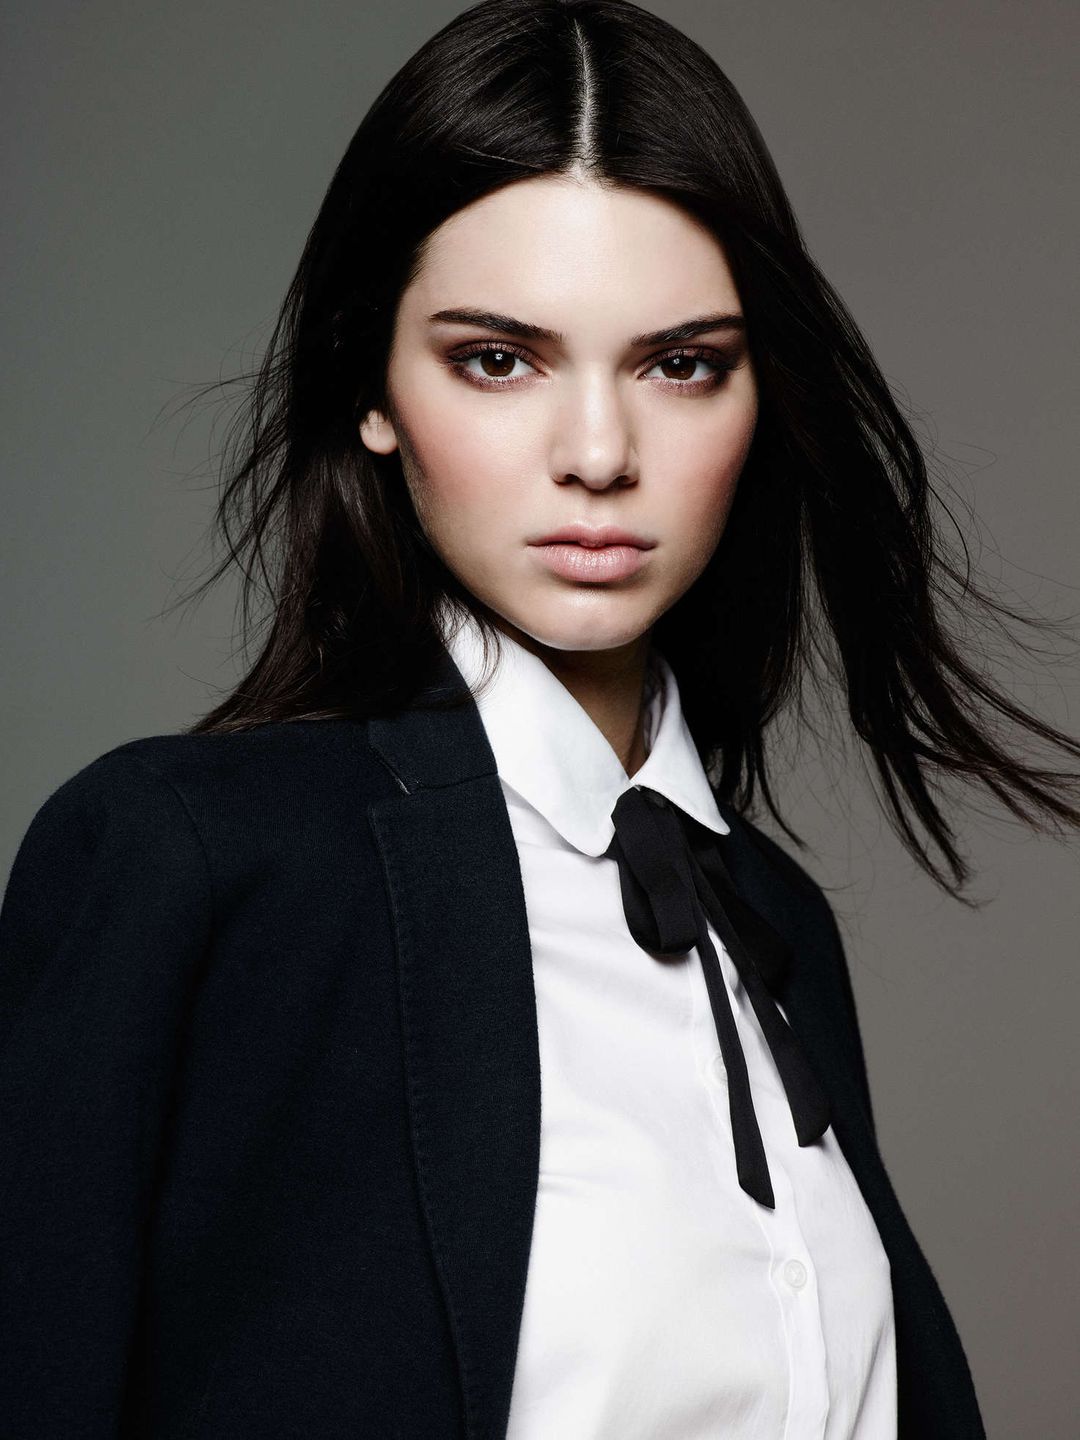 Kendall Jenner unphotoshopped pictures